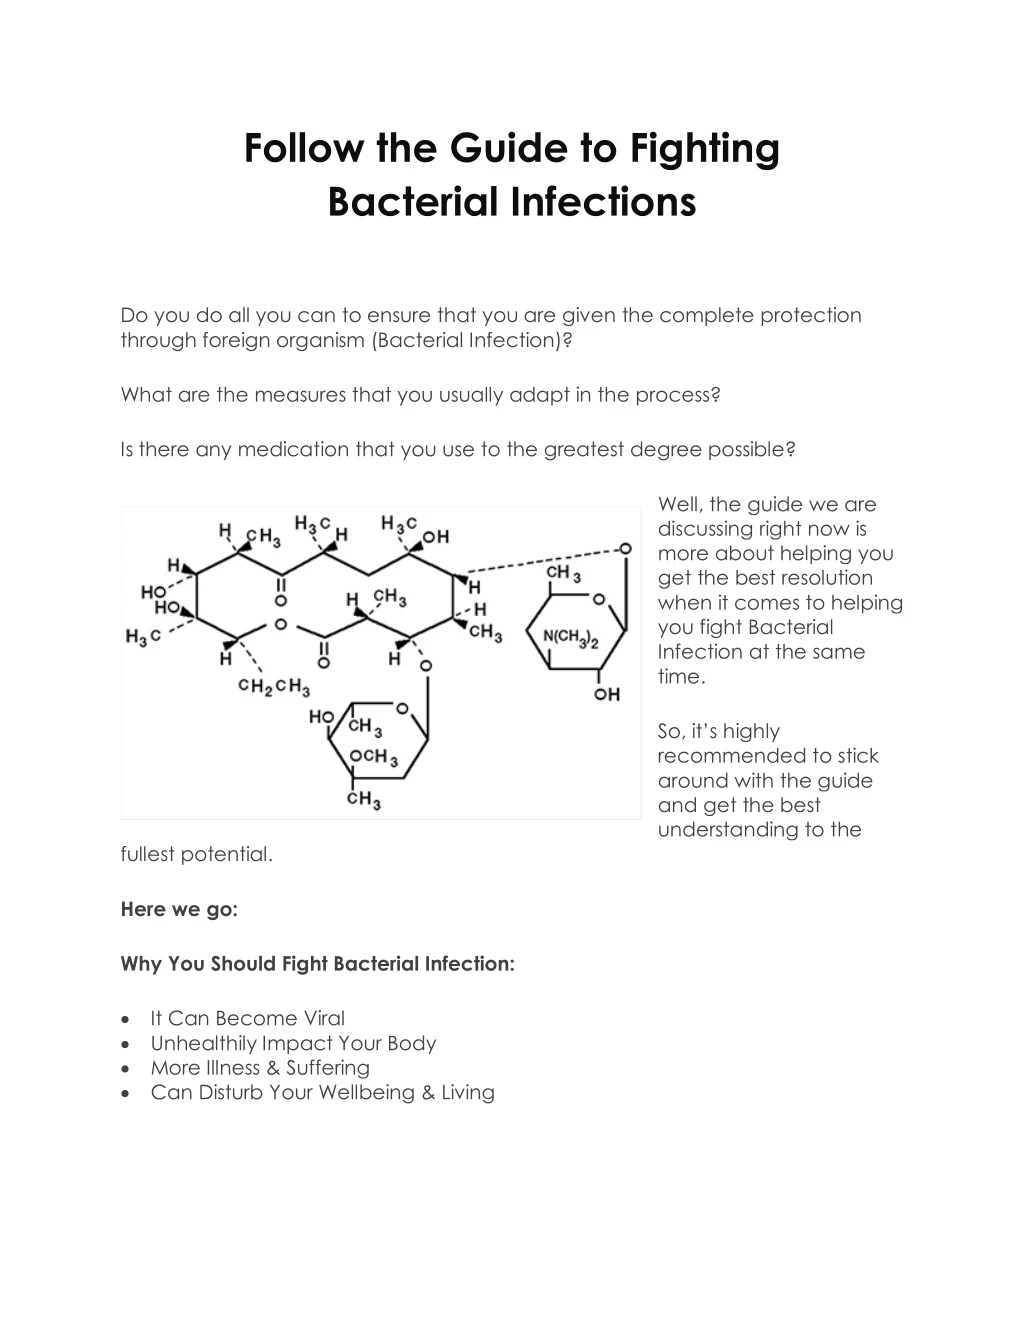 follow the guide to fighting bacterial infections